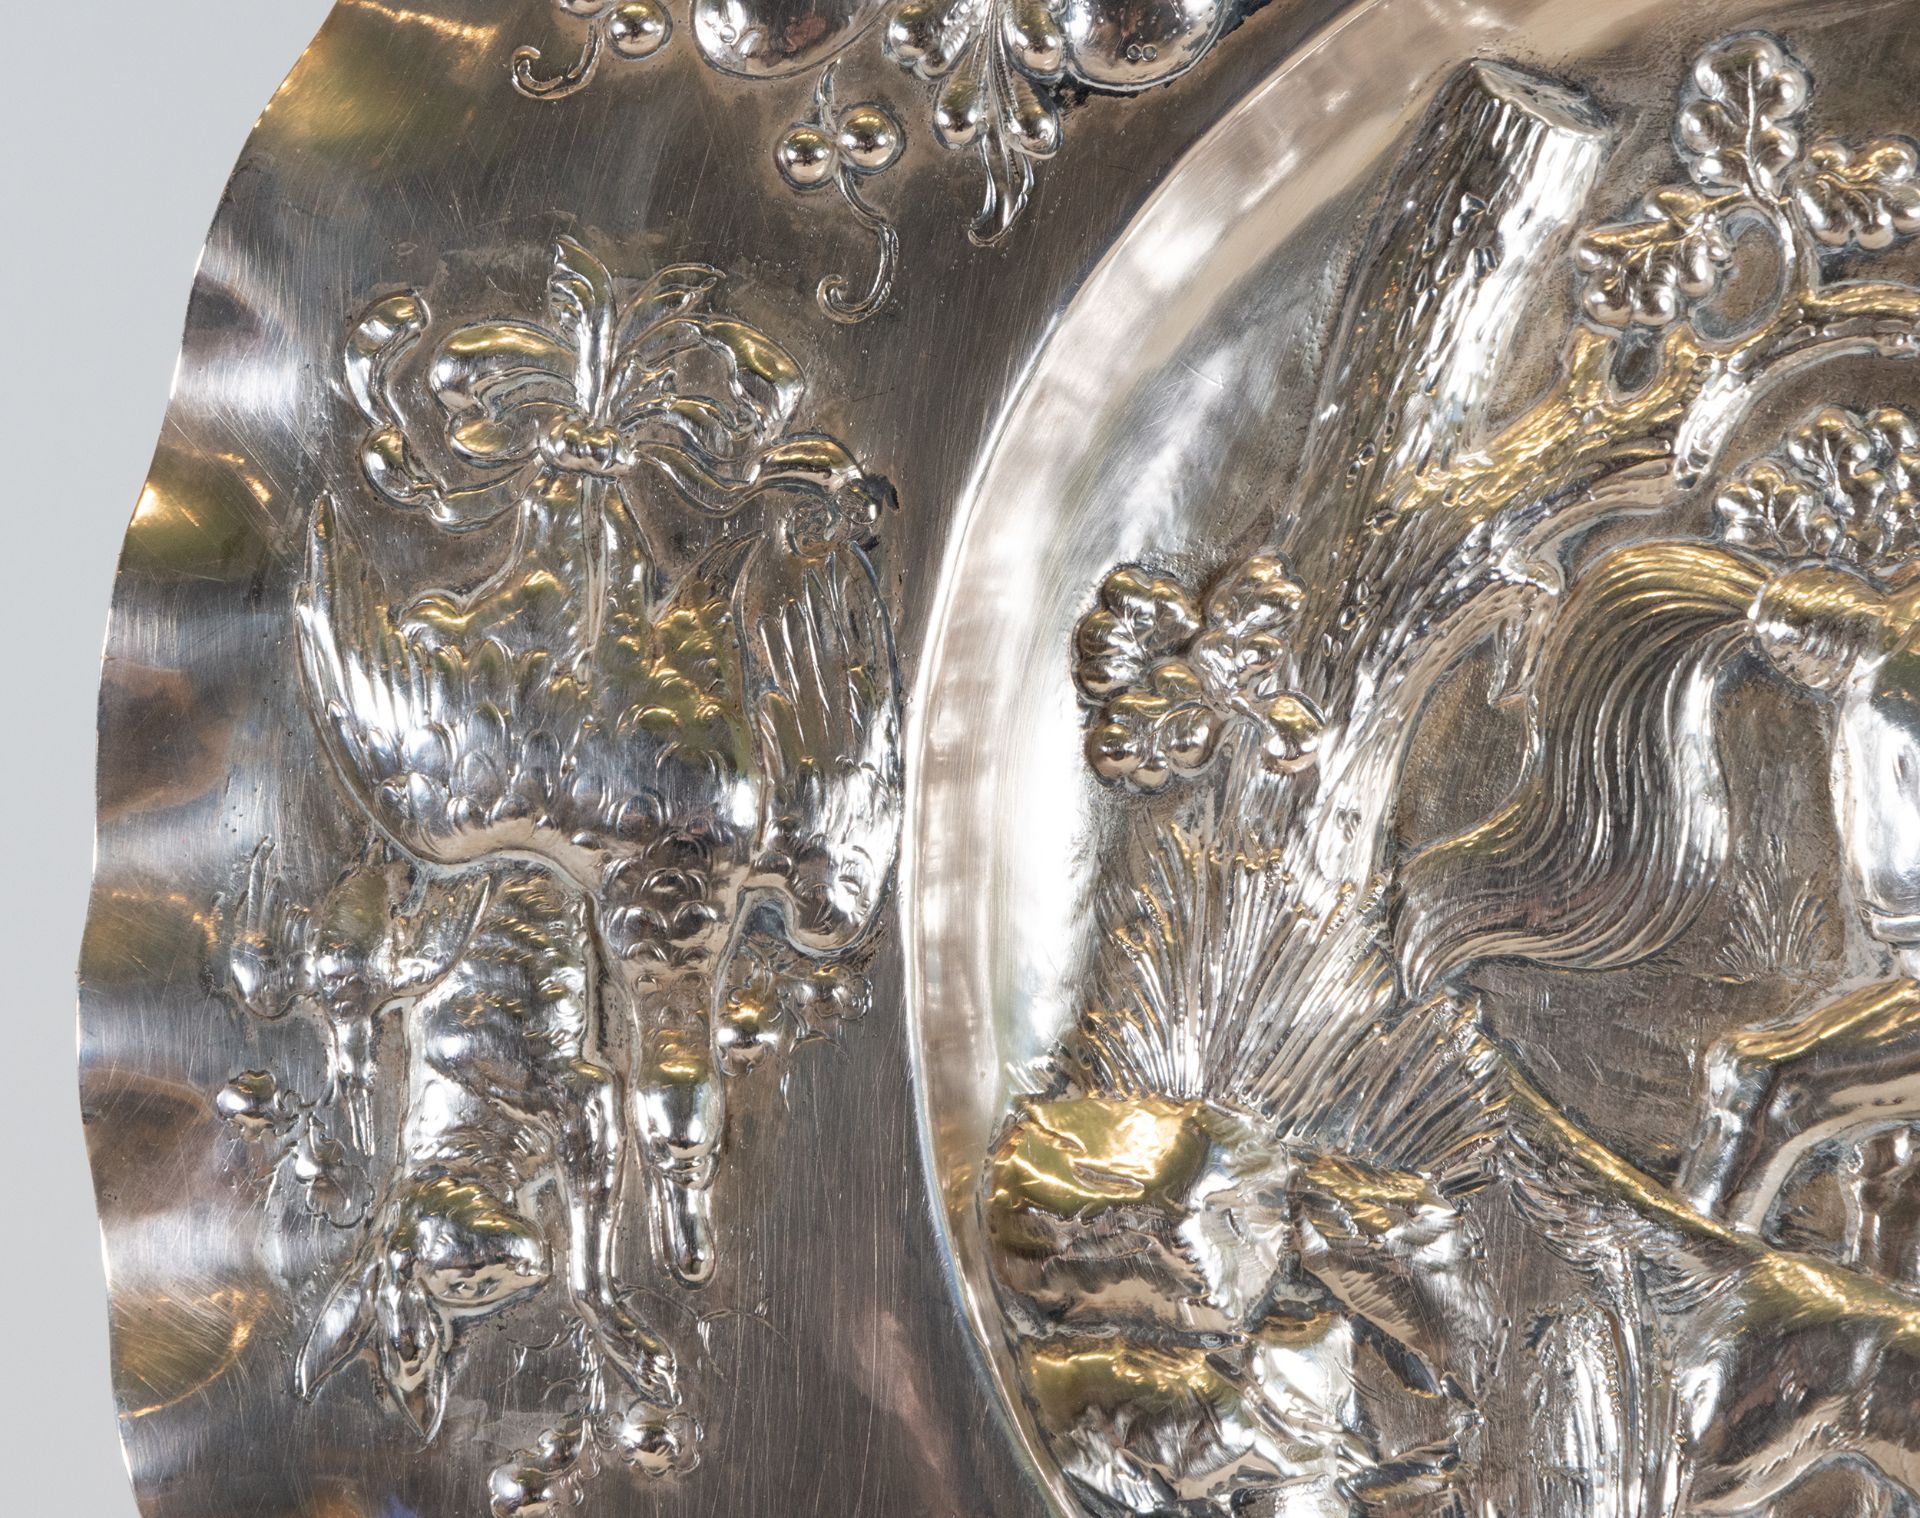 Large Pair of Sterling Silver Trays with Chivalry Motifs, Marks of England, 19th Century - Bild 3 aus 12